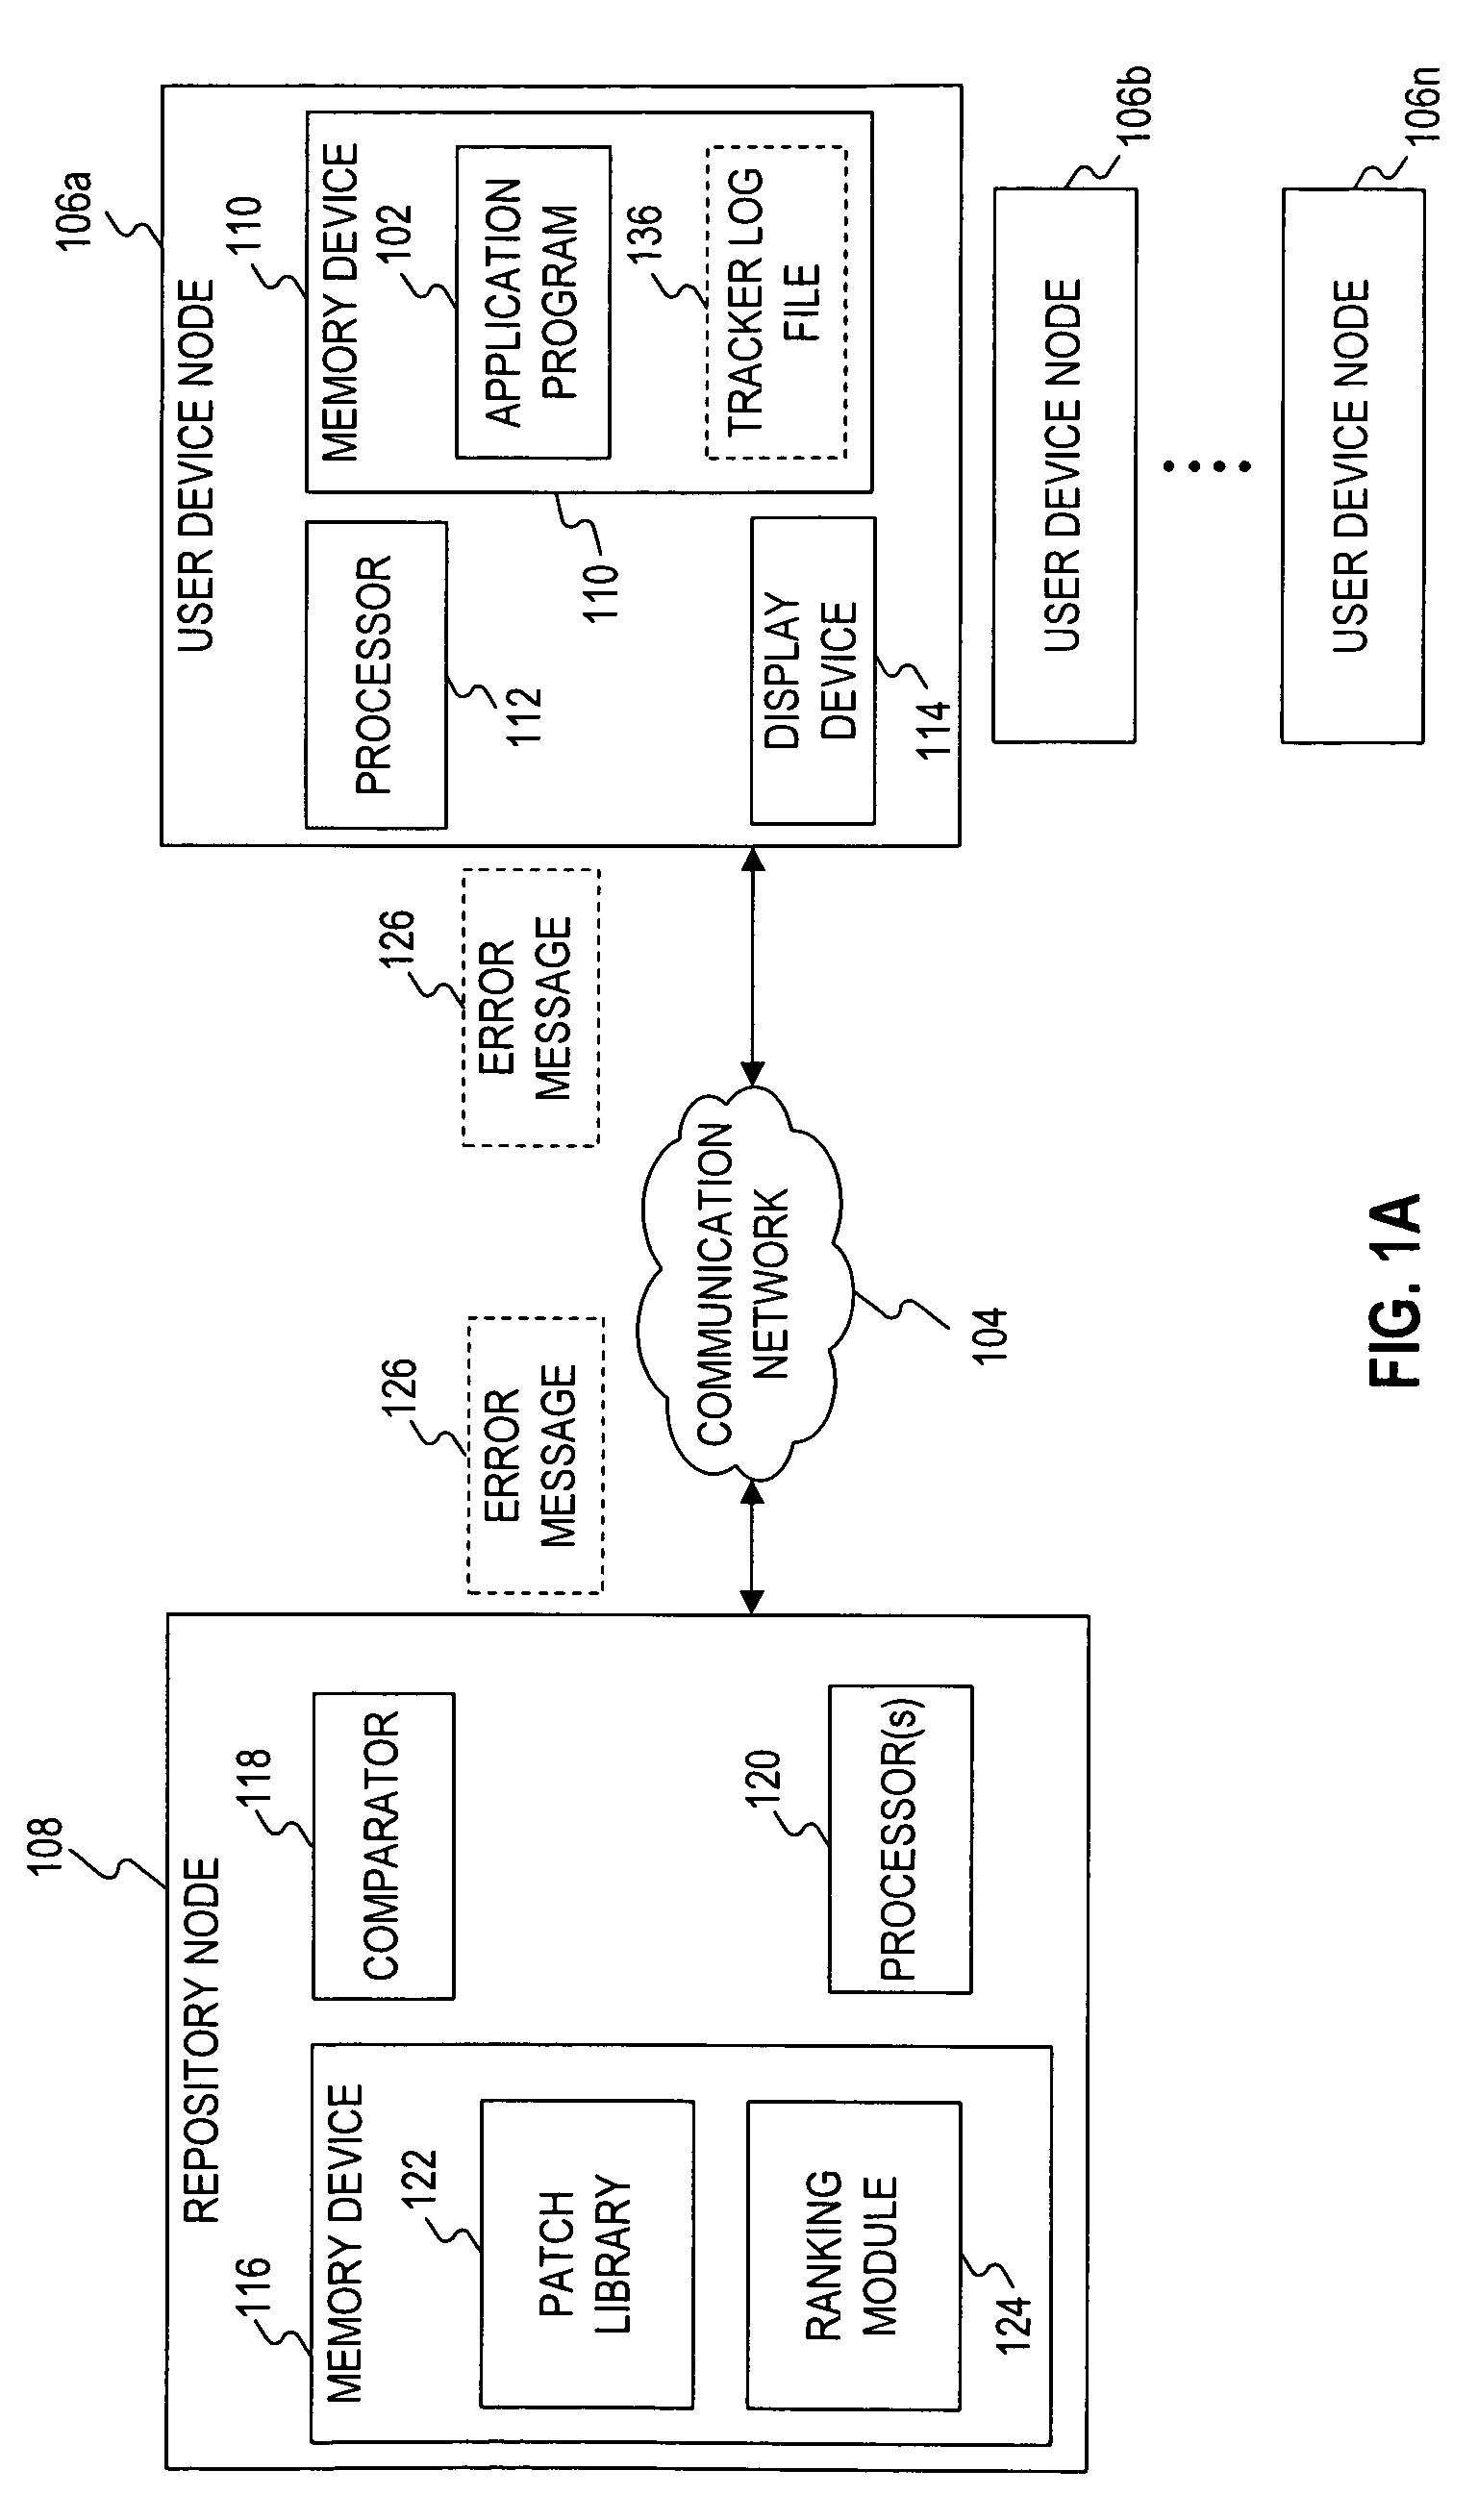 Systems and methods for correcting software errors